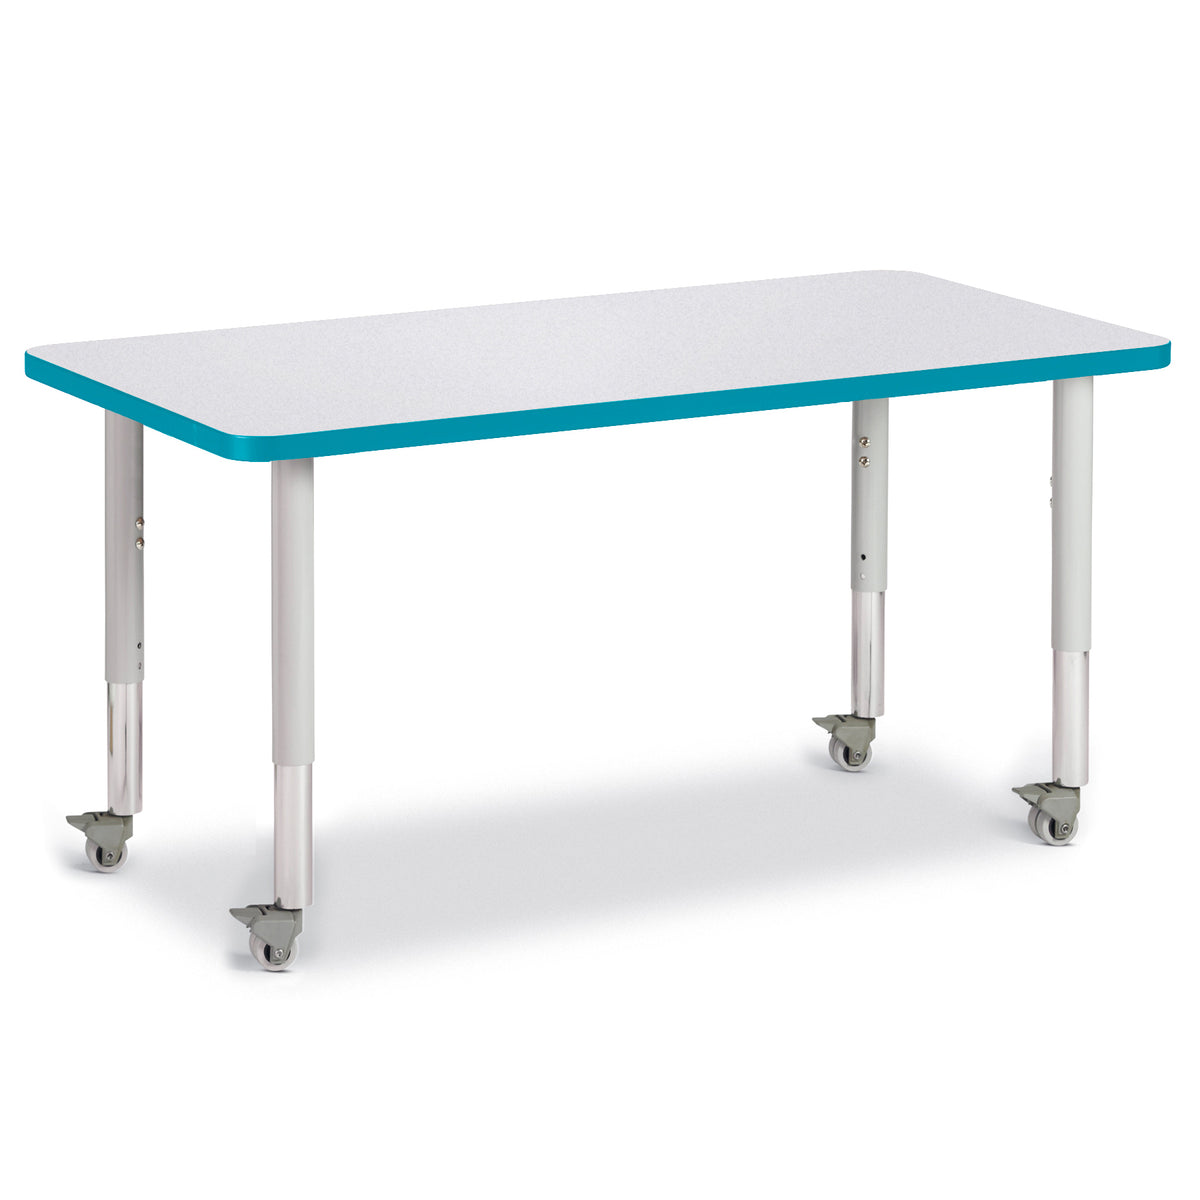 6403JCM005, Berries Rectangle Activity Table - 24" X 48", Mobile - Freckled Gray/Teal/Gray